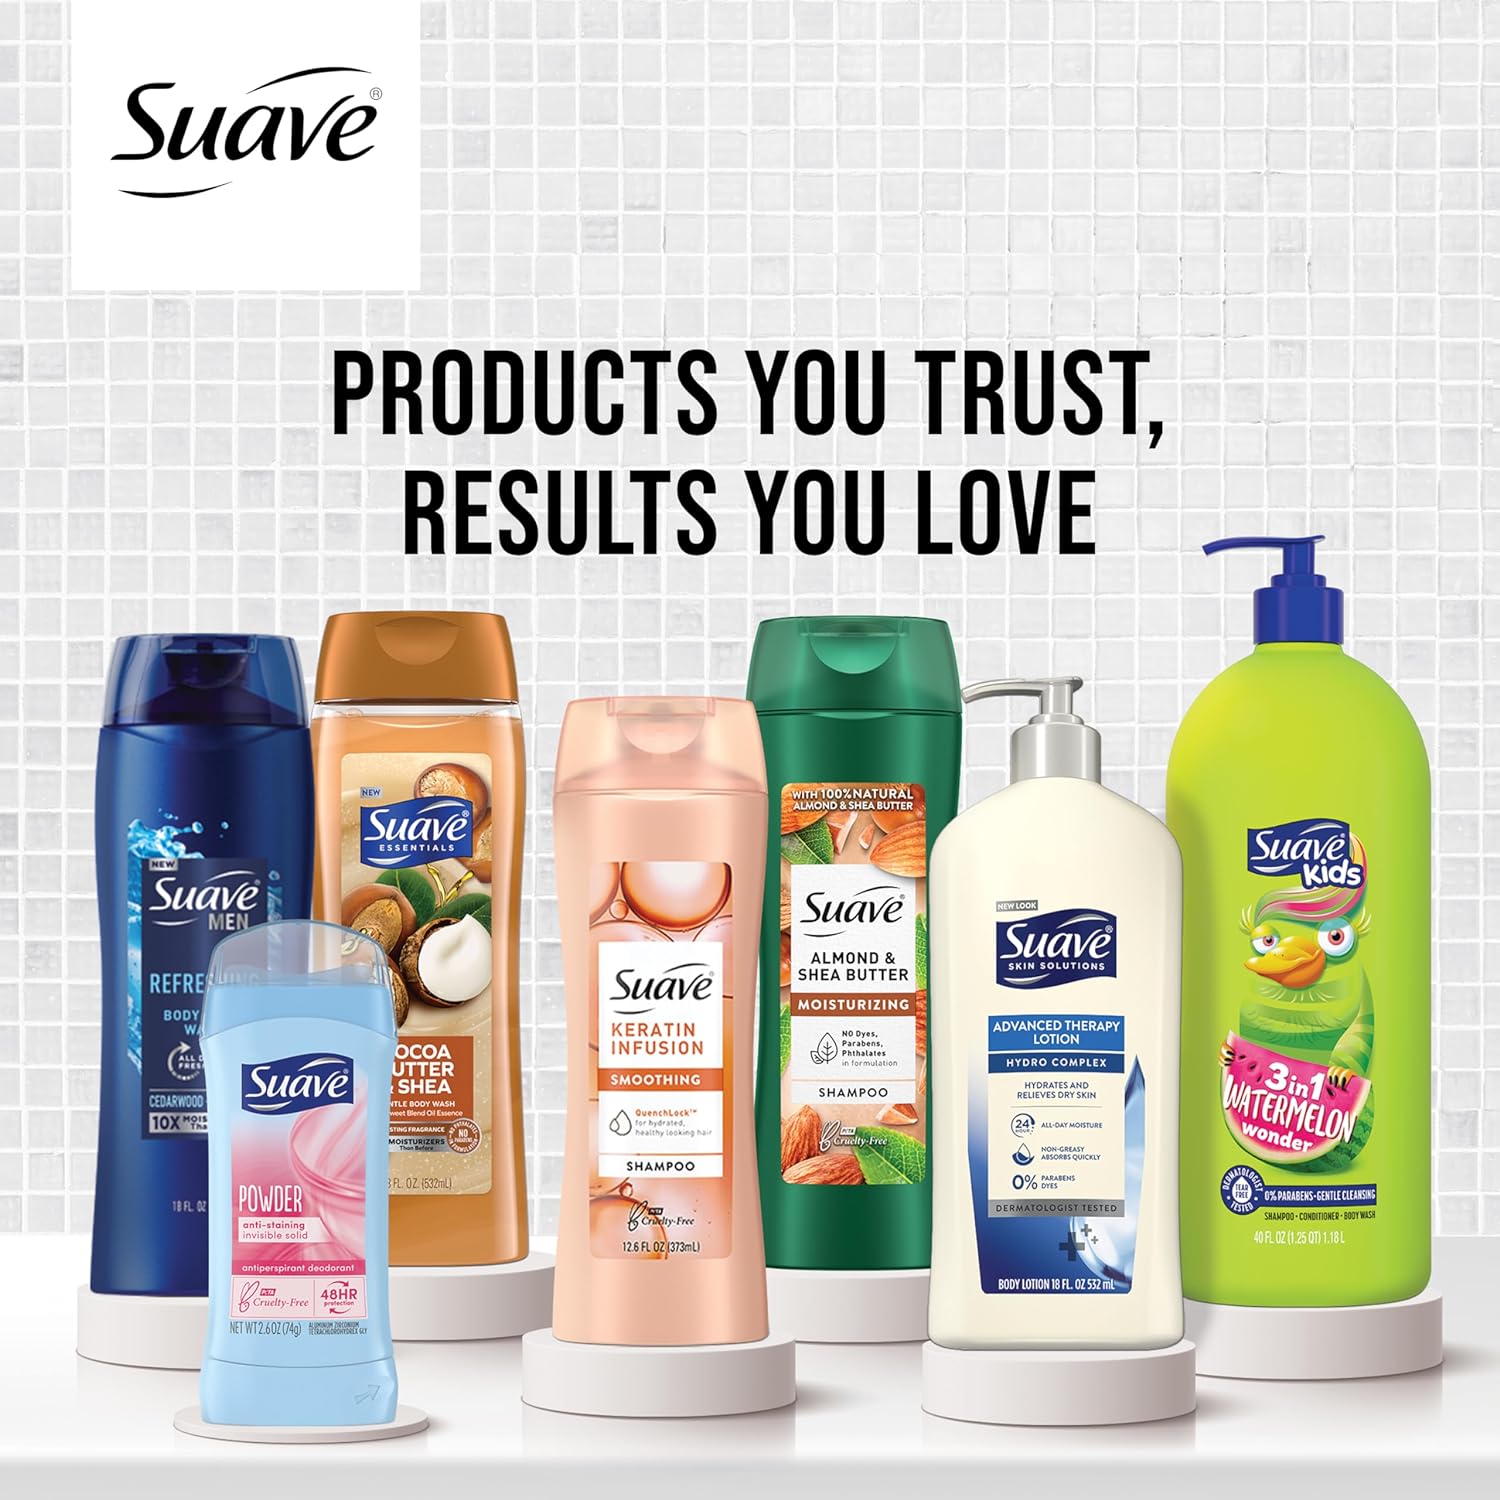 Suave Deodorant Women, Antiperspirant, Powder and Fresh Bundle, 48-Hour Odor & Wetness Protection, with Essential Oils, anti-staining, no baking soda Bundle 4 x 2.6 oz : Beauty & Personal Care